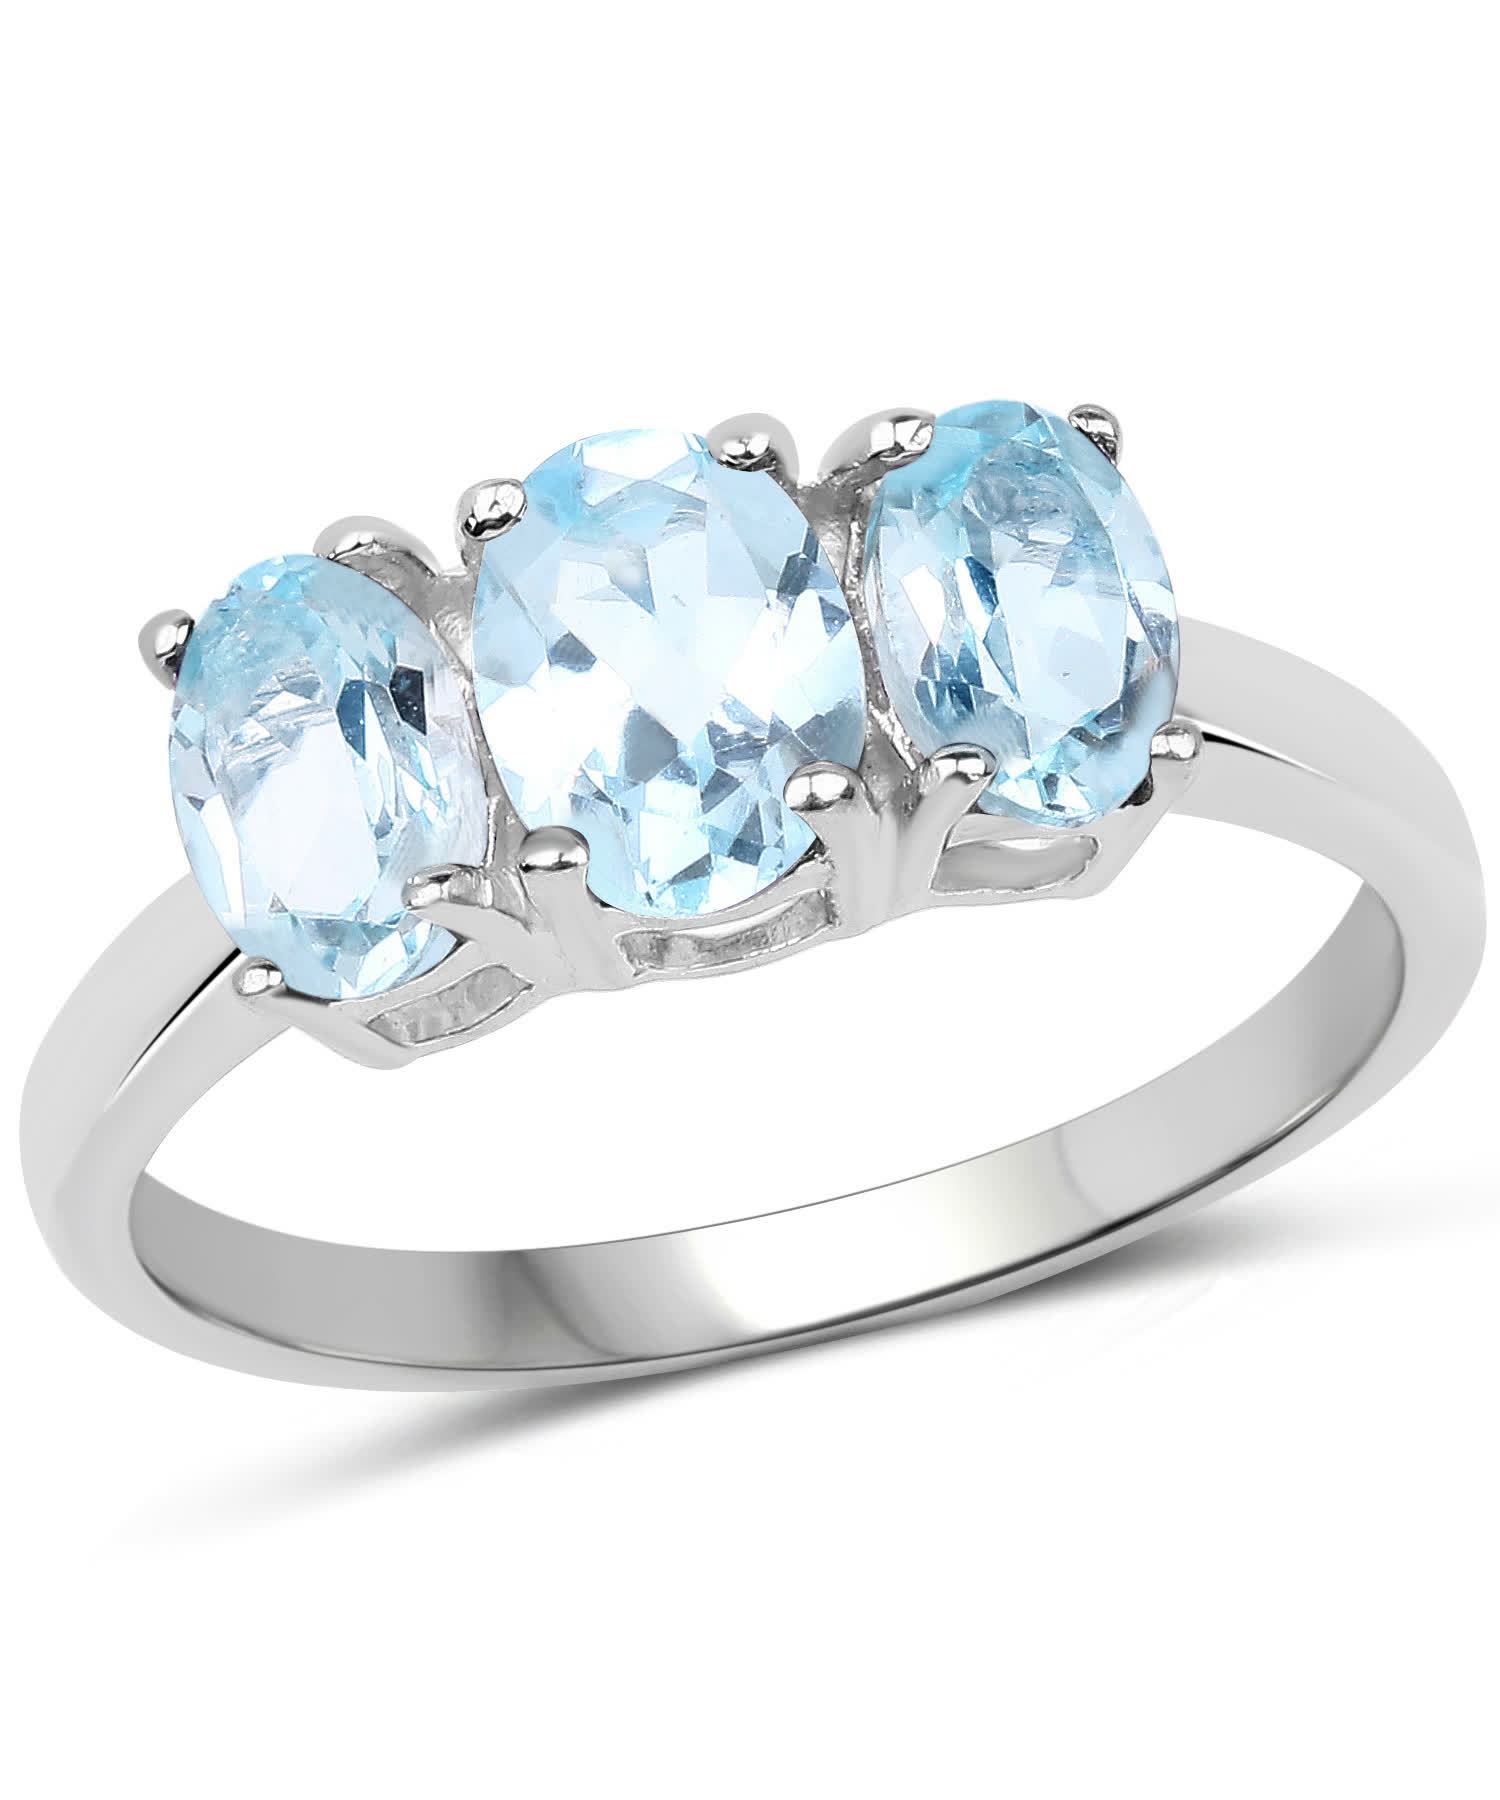 1.97ctw Natural Sky Blue Topaz Rhodium Plated 925 Sterling Silver Three-Stone Ring View 1